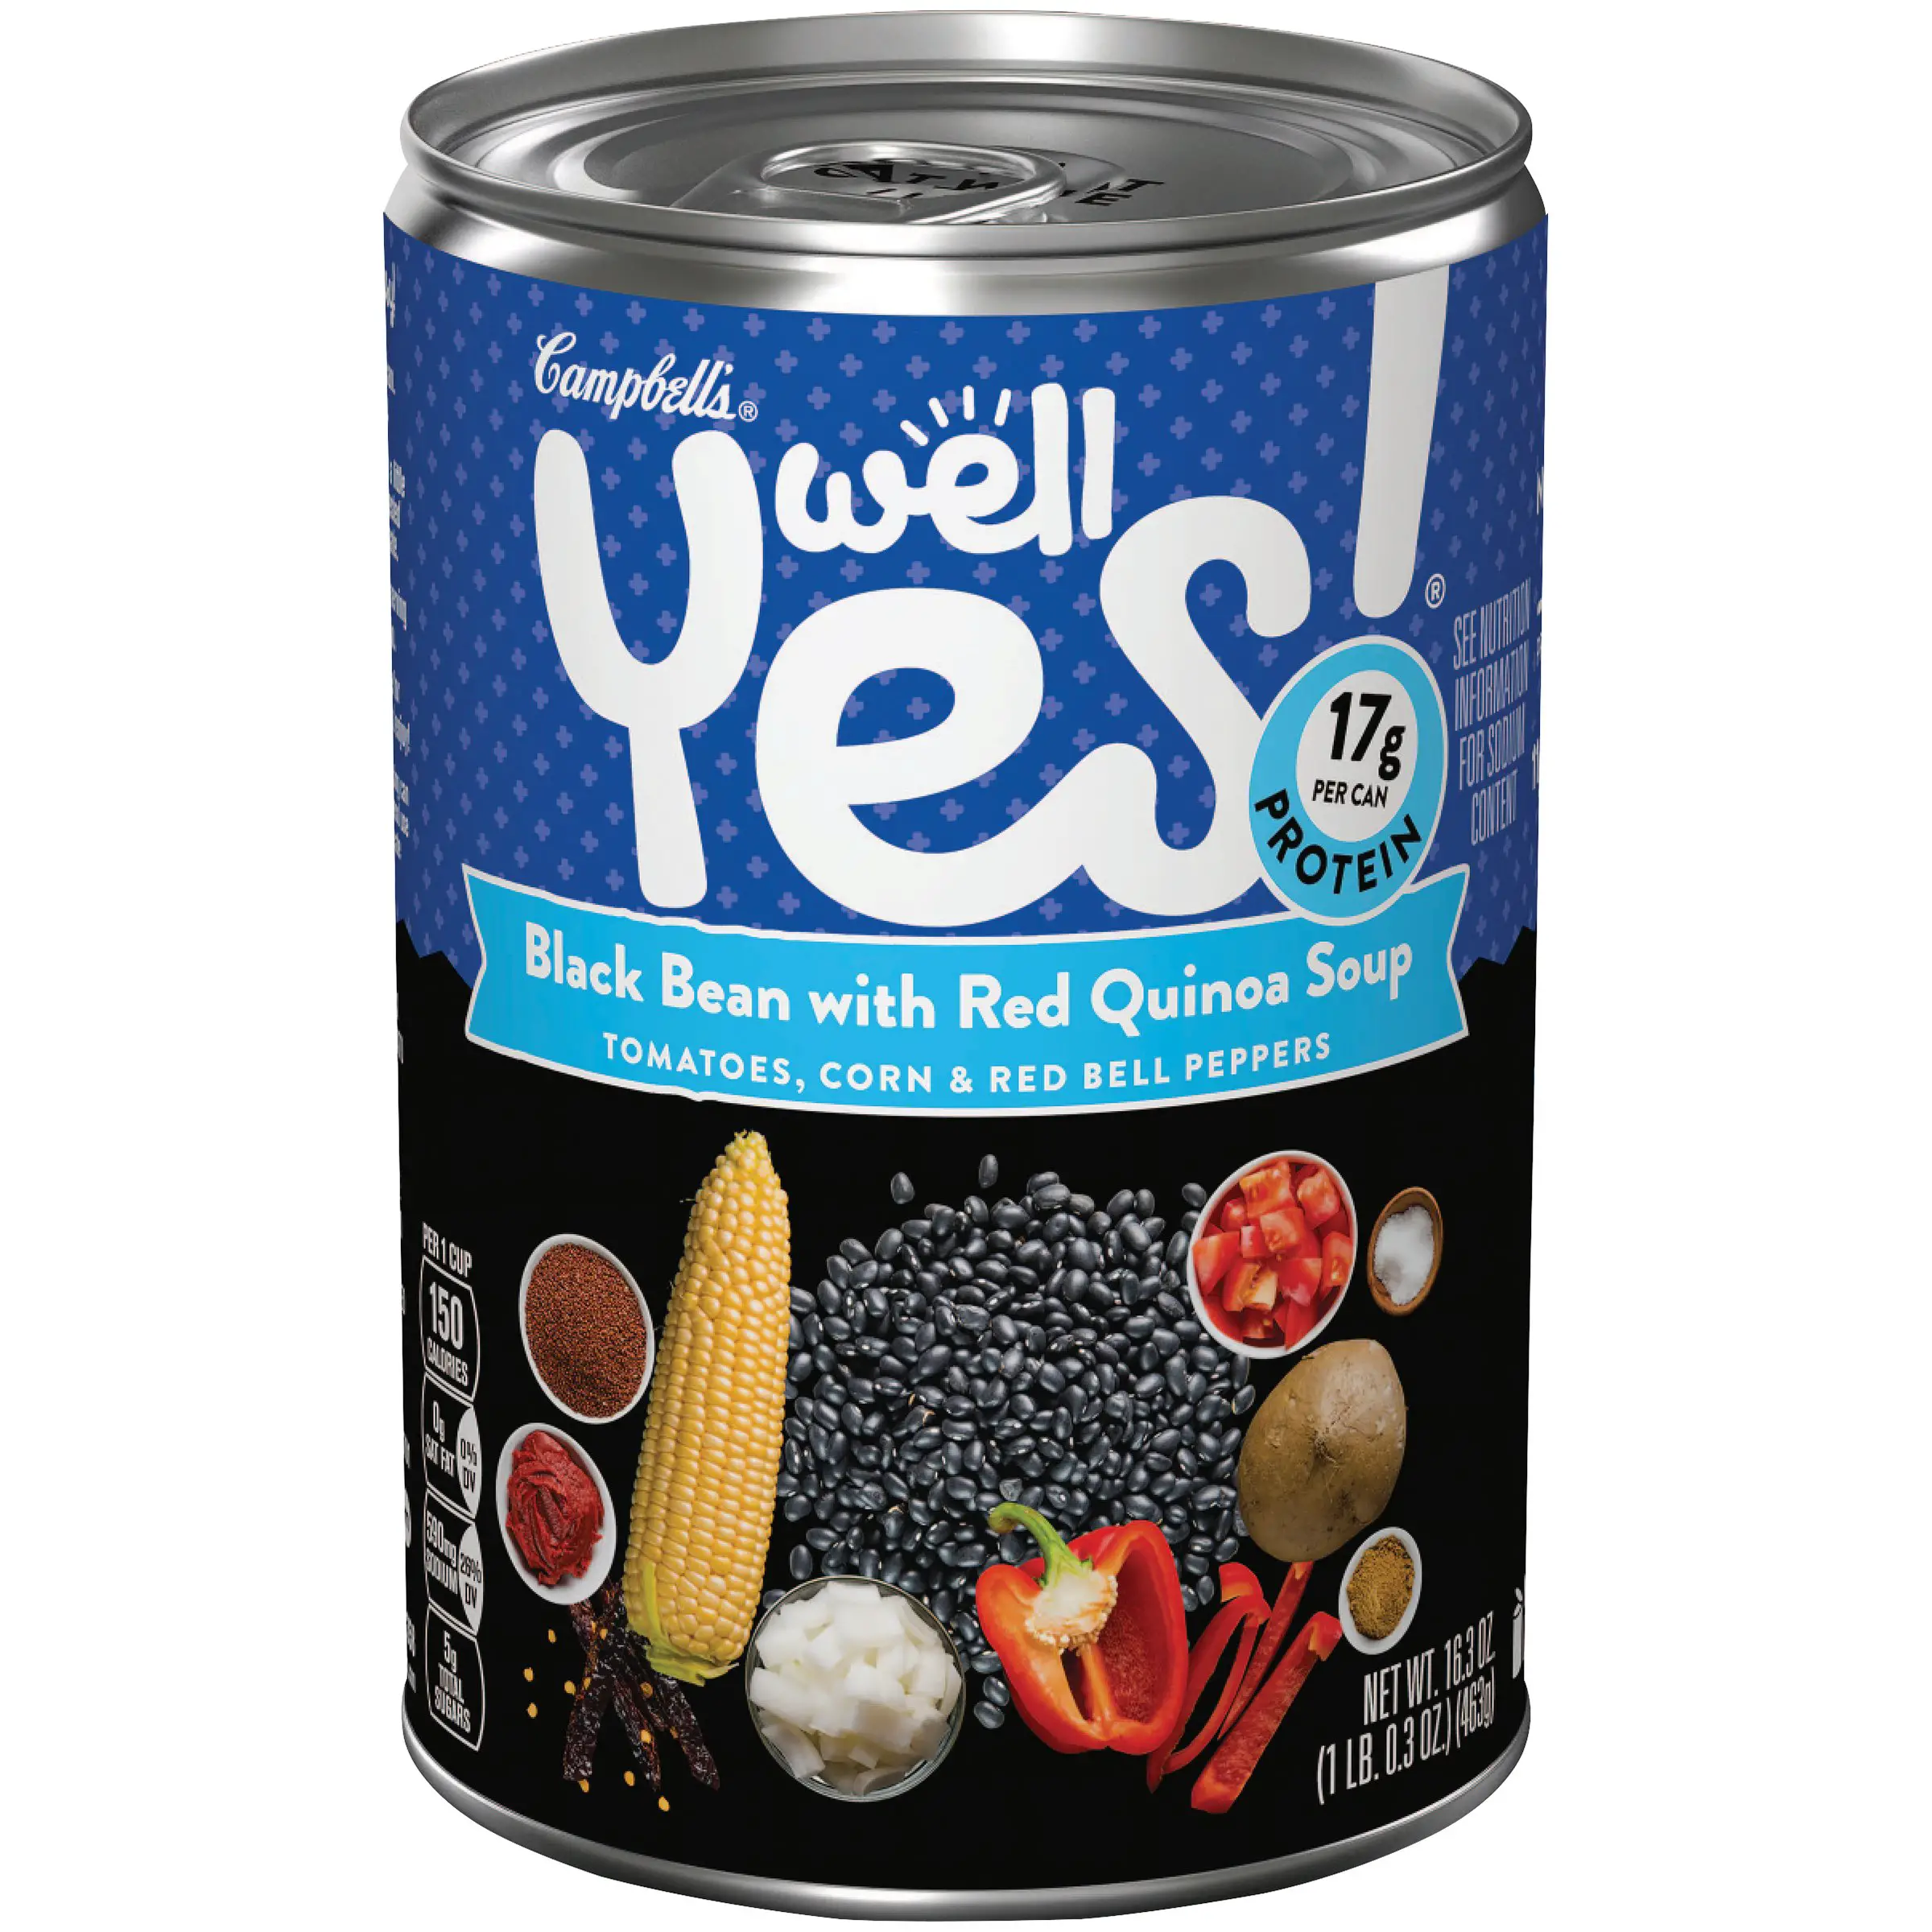 Amazon.com : Well Yes! Soup, Roasted Chicken with Wild Rice, 16.3 oz ...